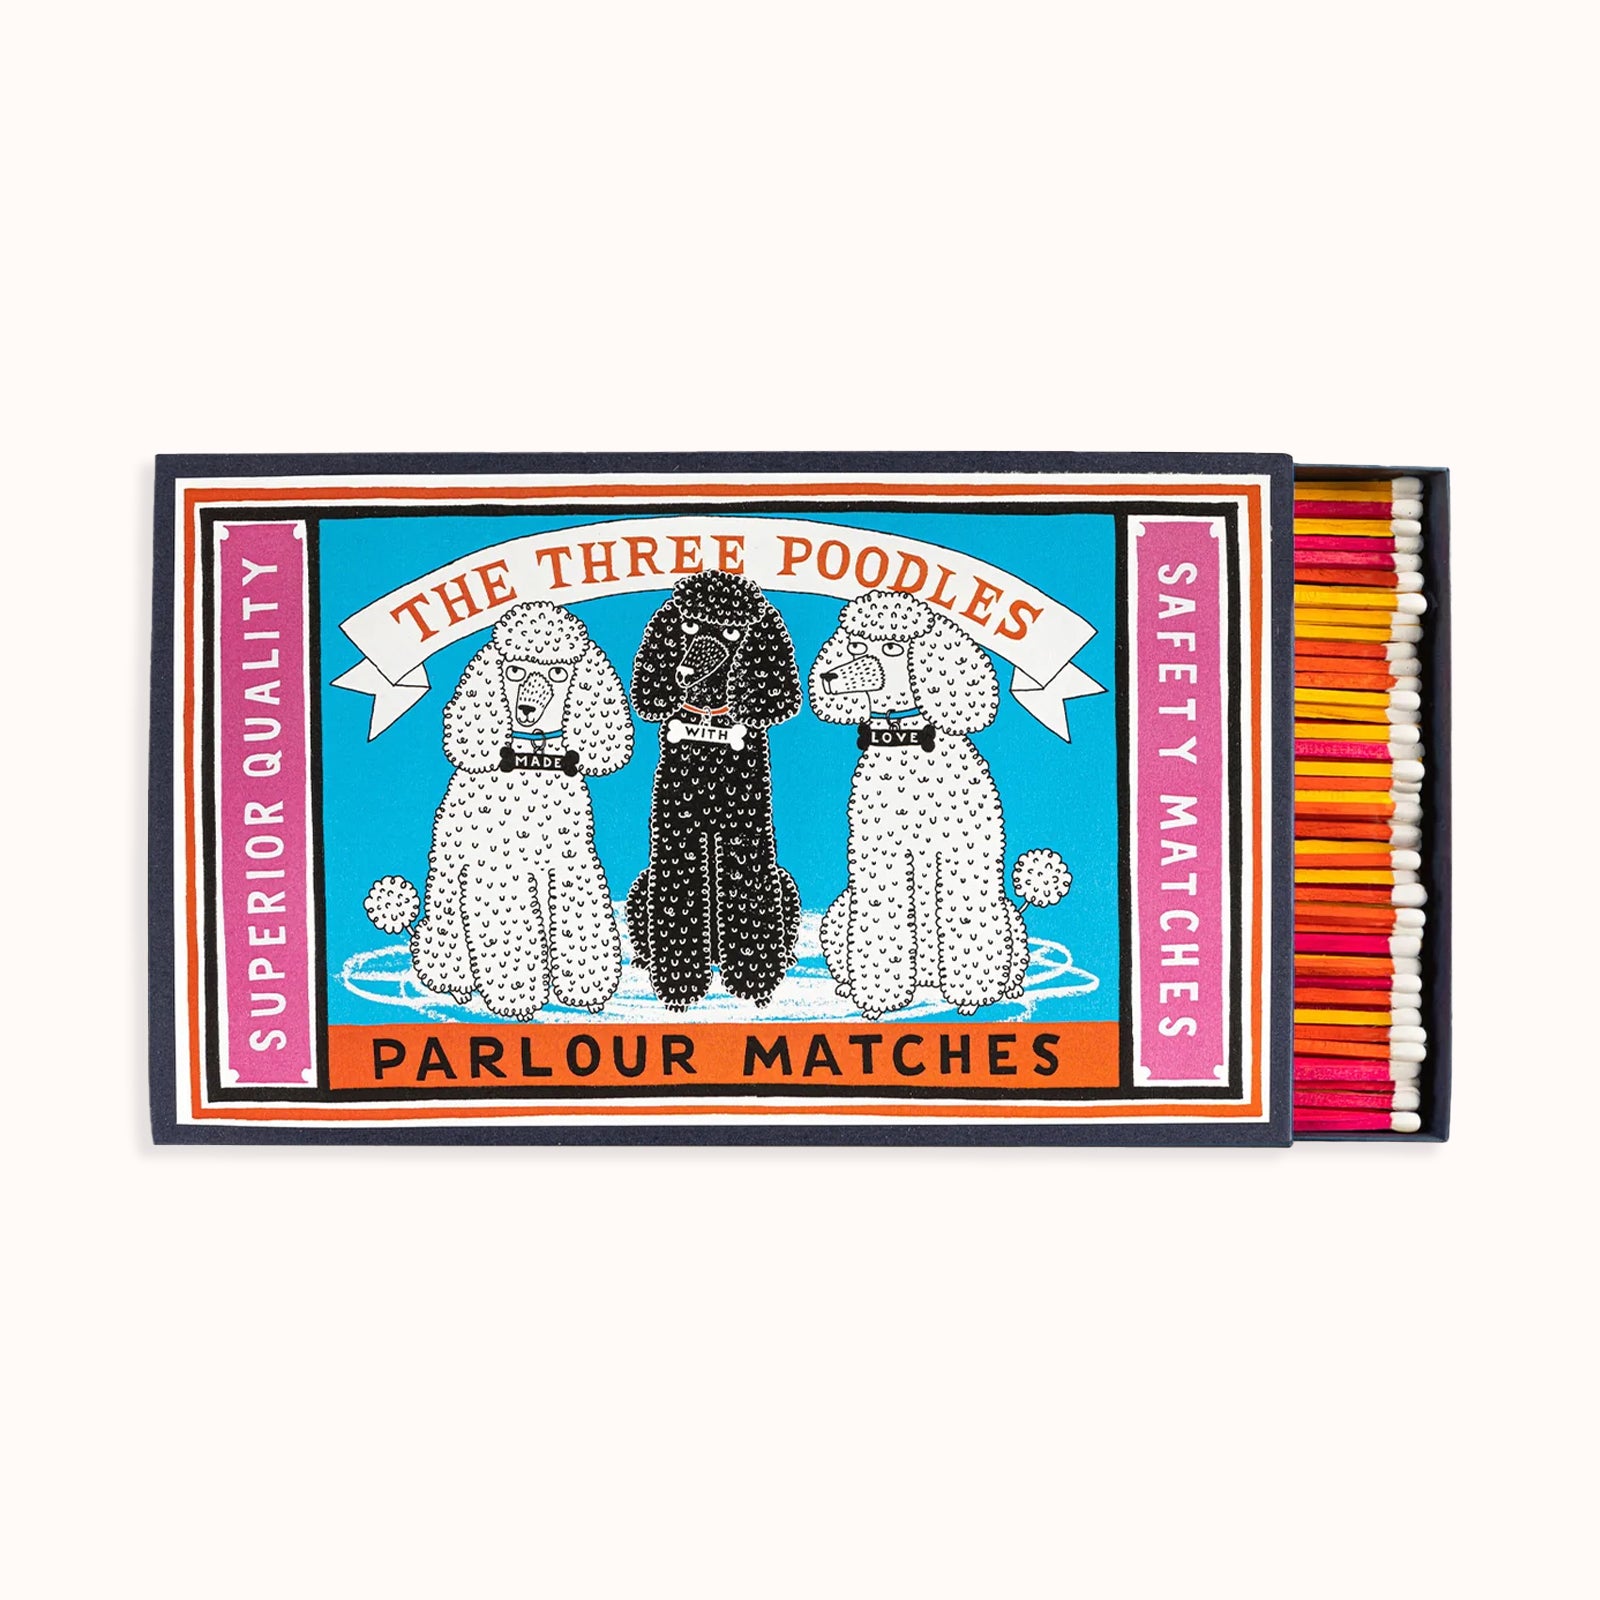 Archivist Gallery Giant Three Poodle Luxury Matches